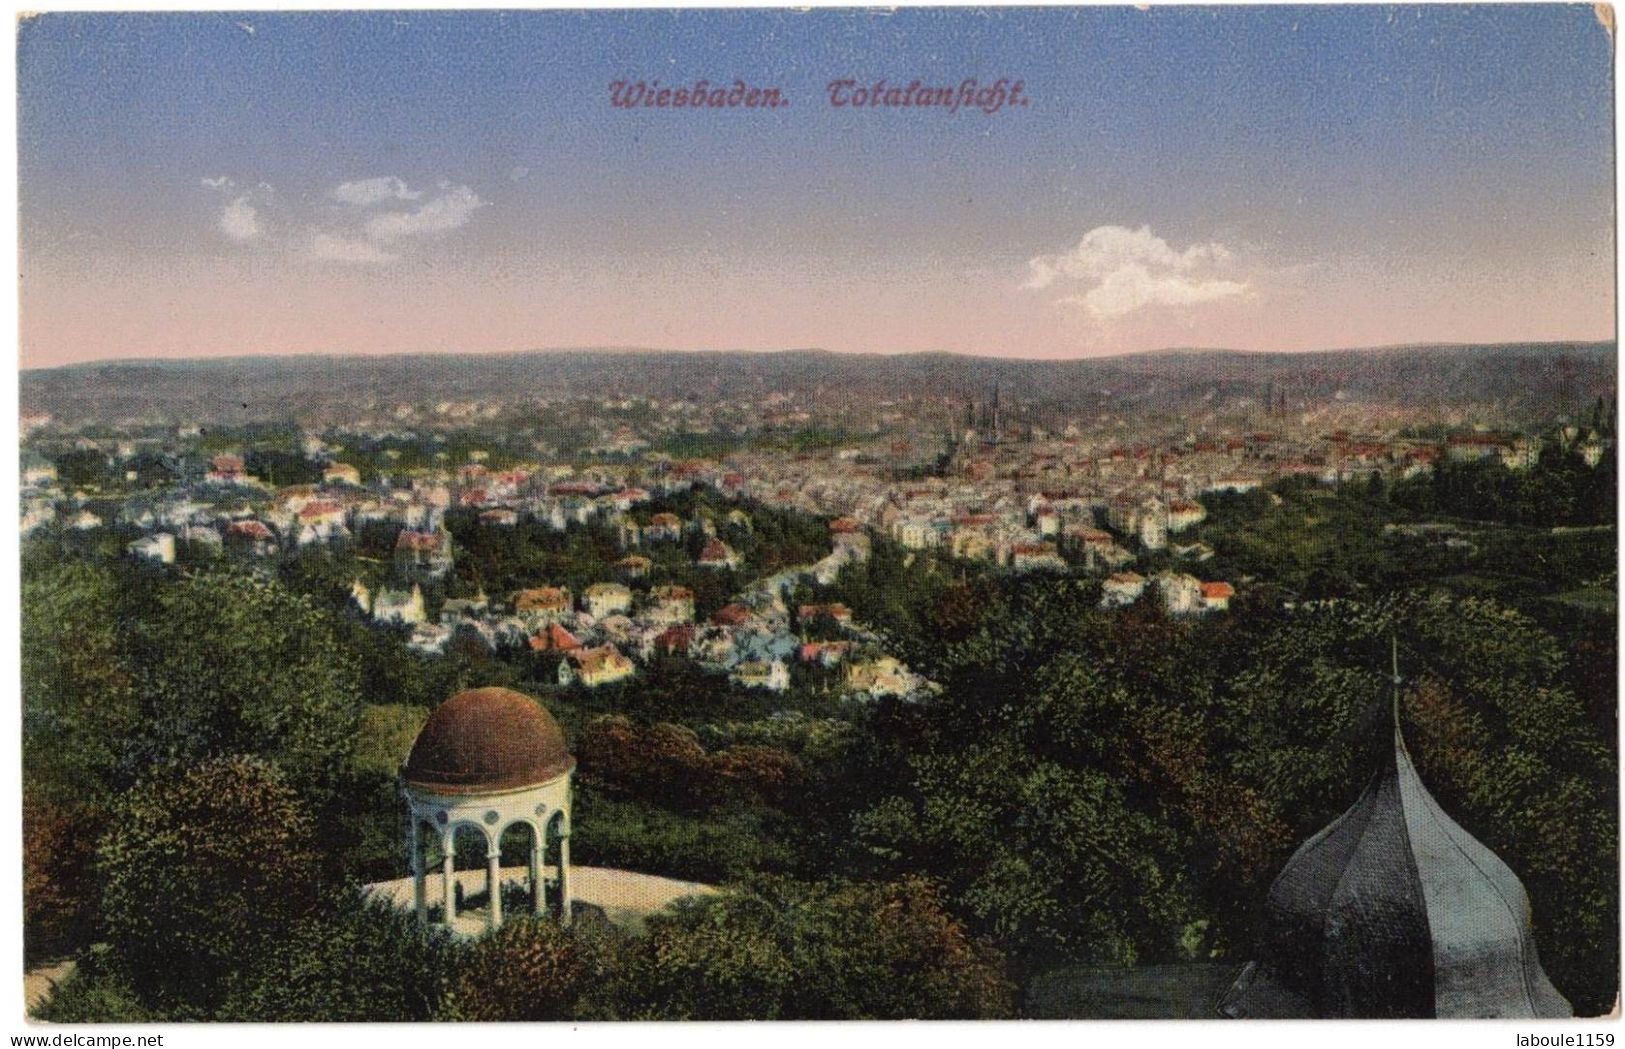 ALLEMAGNE GERMANY HESSE WIESBADEN : TOTALANSICHT - EDITION COLORISEE - PKW